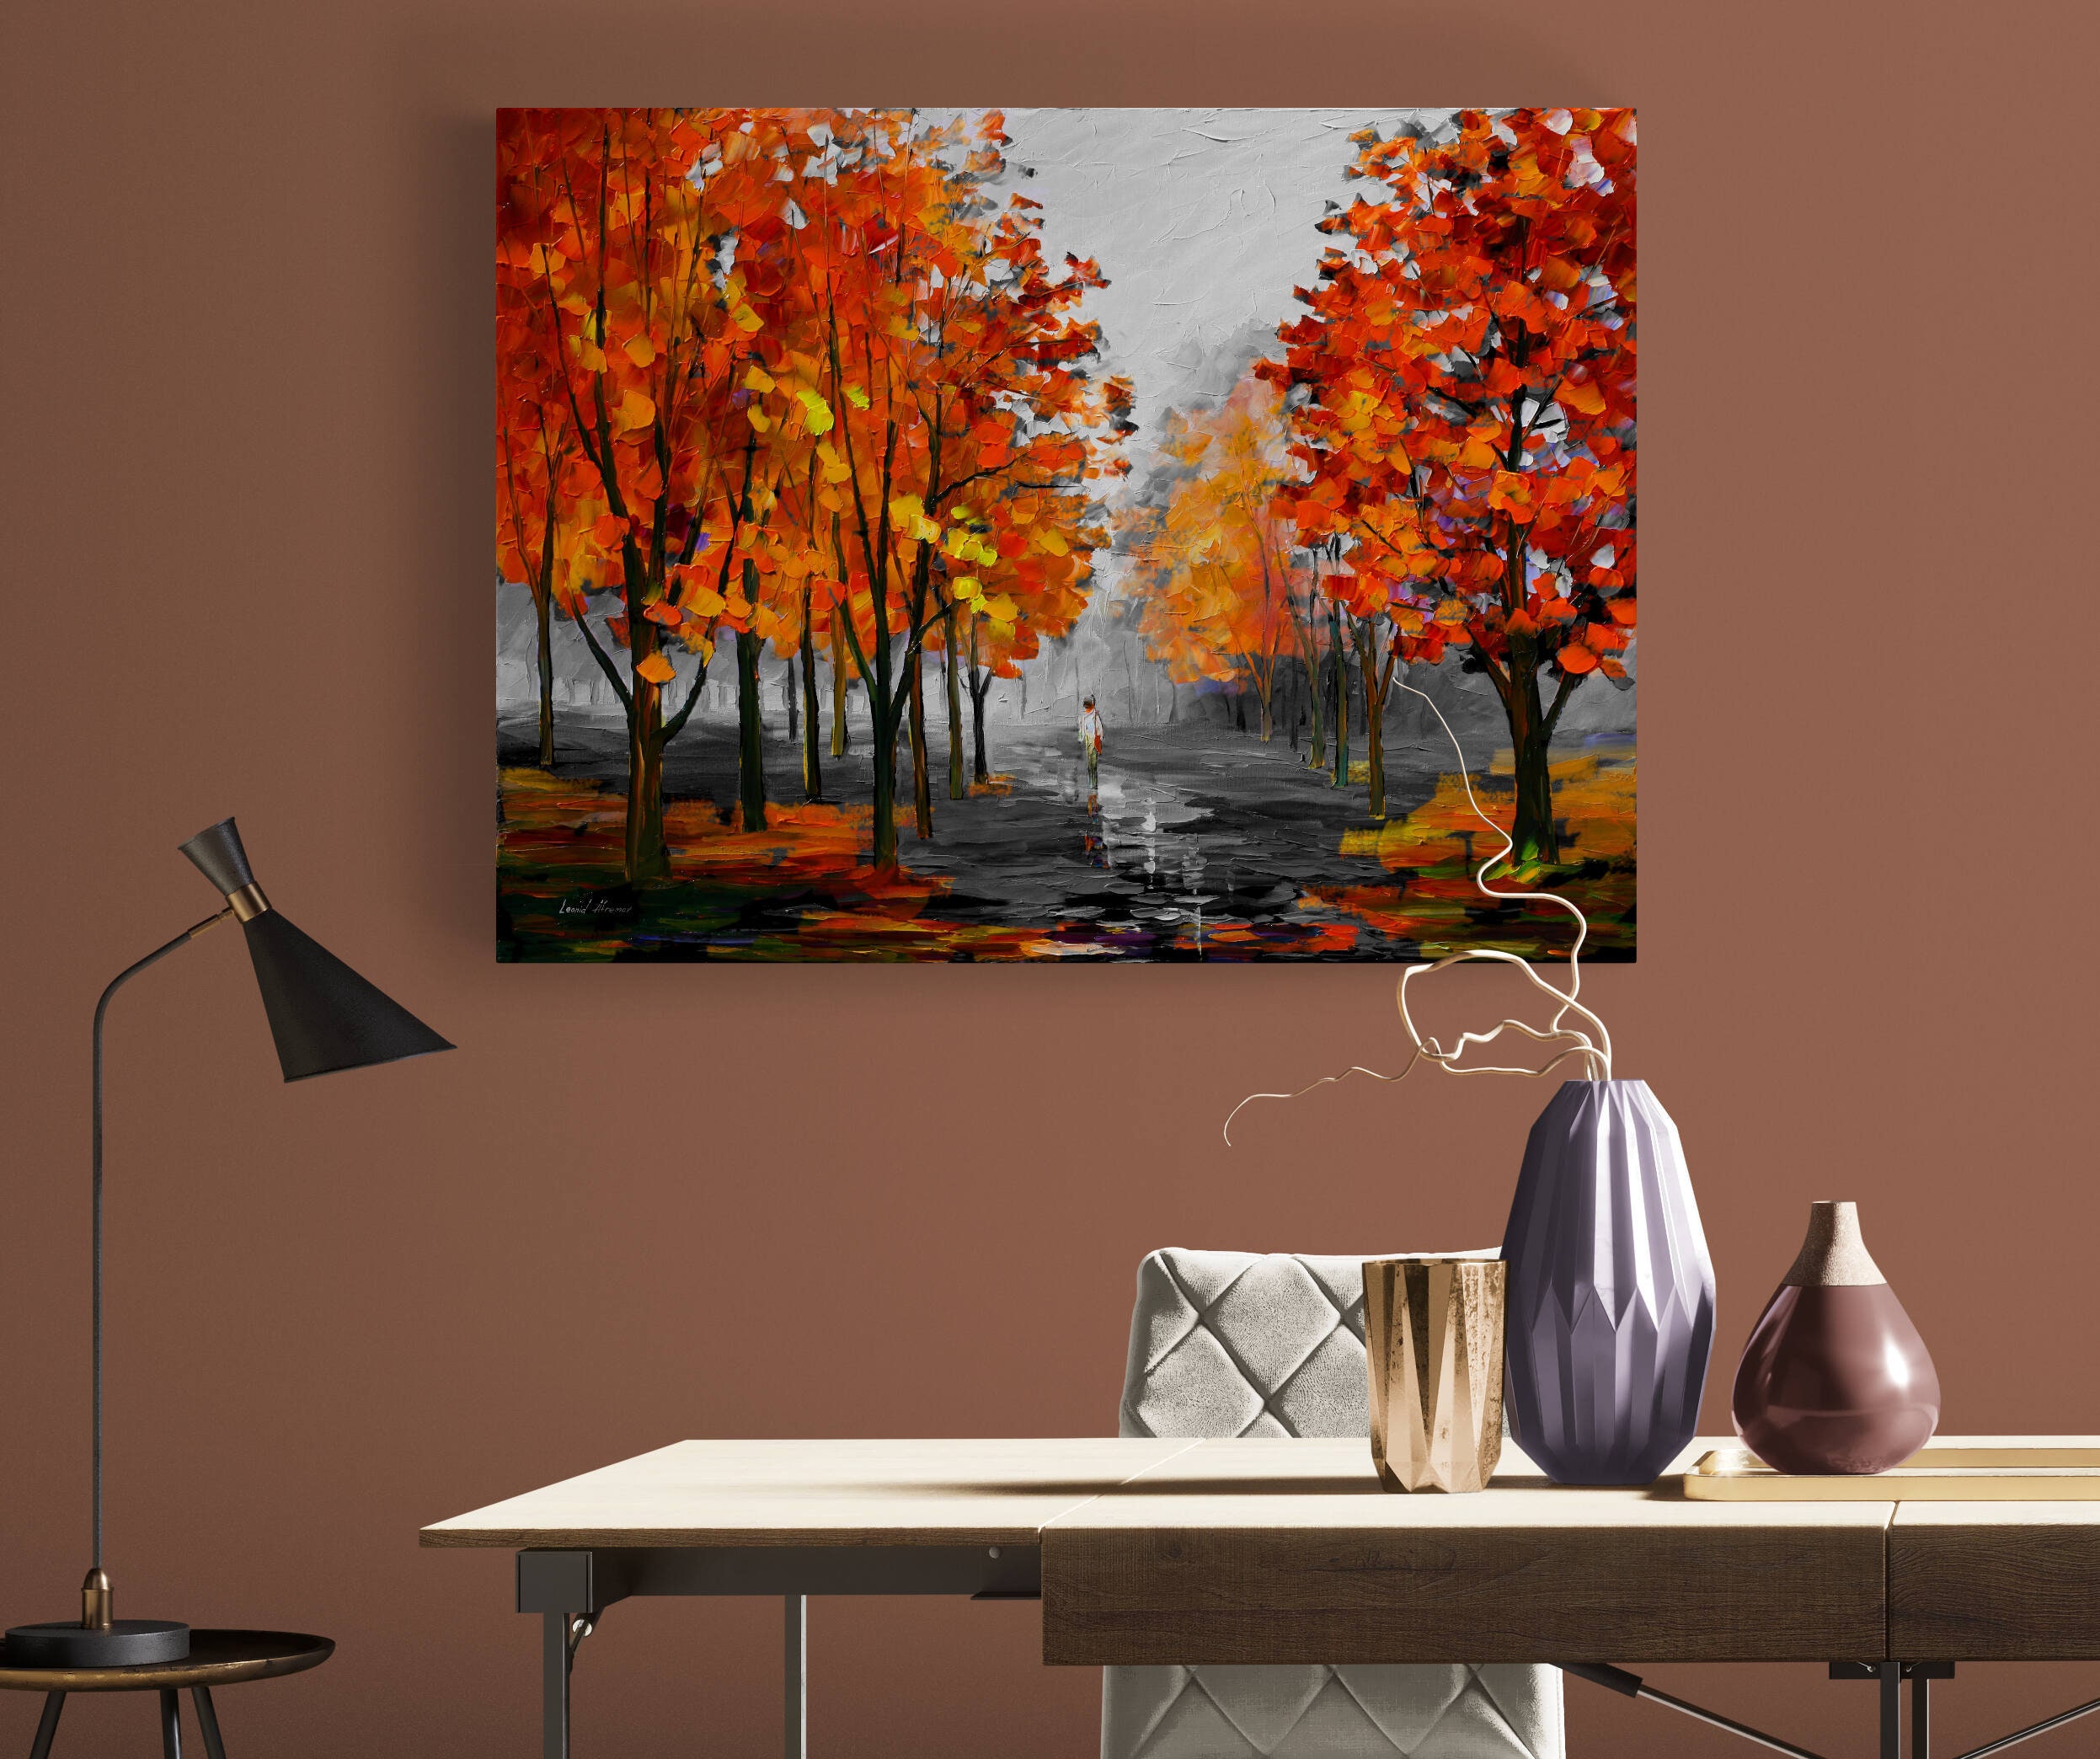 Autumn Wall Art Landscape Print Black And White Artwork by | Etsy